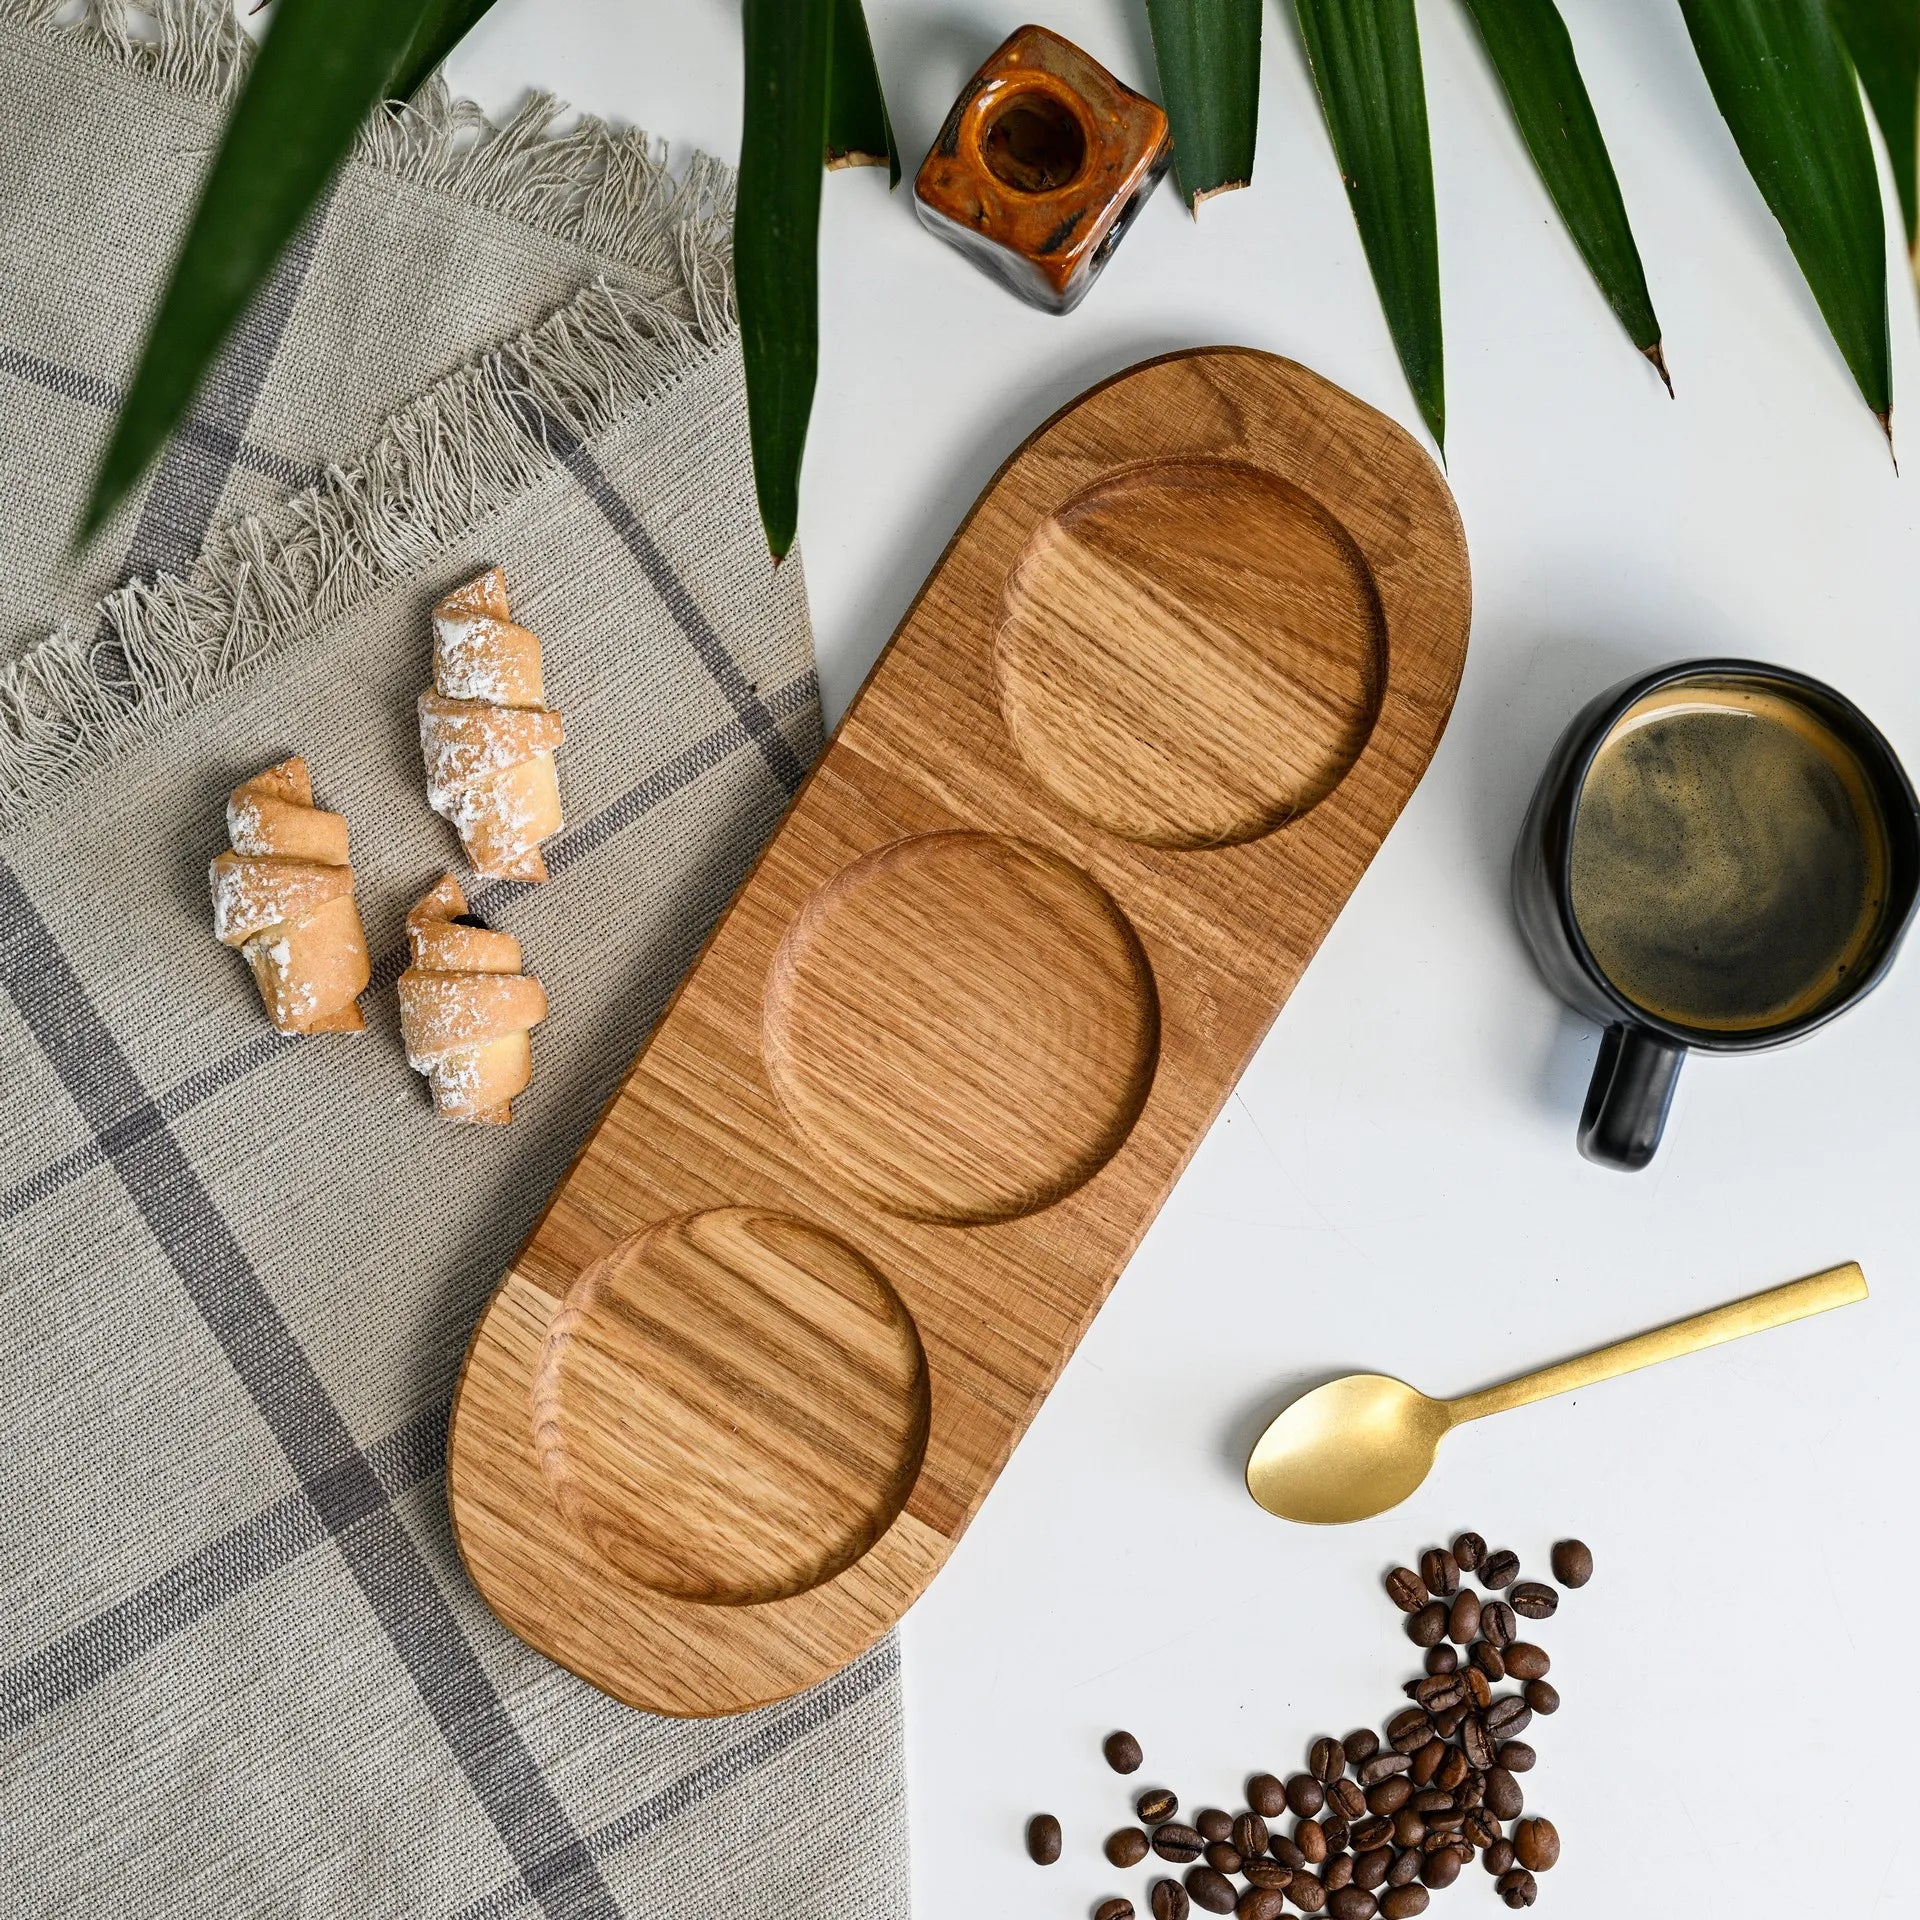 Rustic wooden tray, personalized for hotel use, ideal for presenting breakfast or snacks in guest rooms.